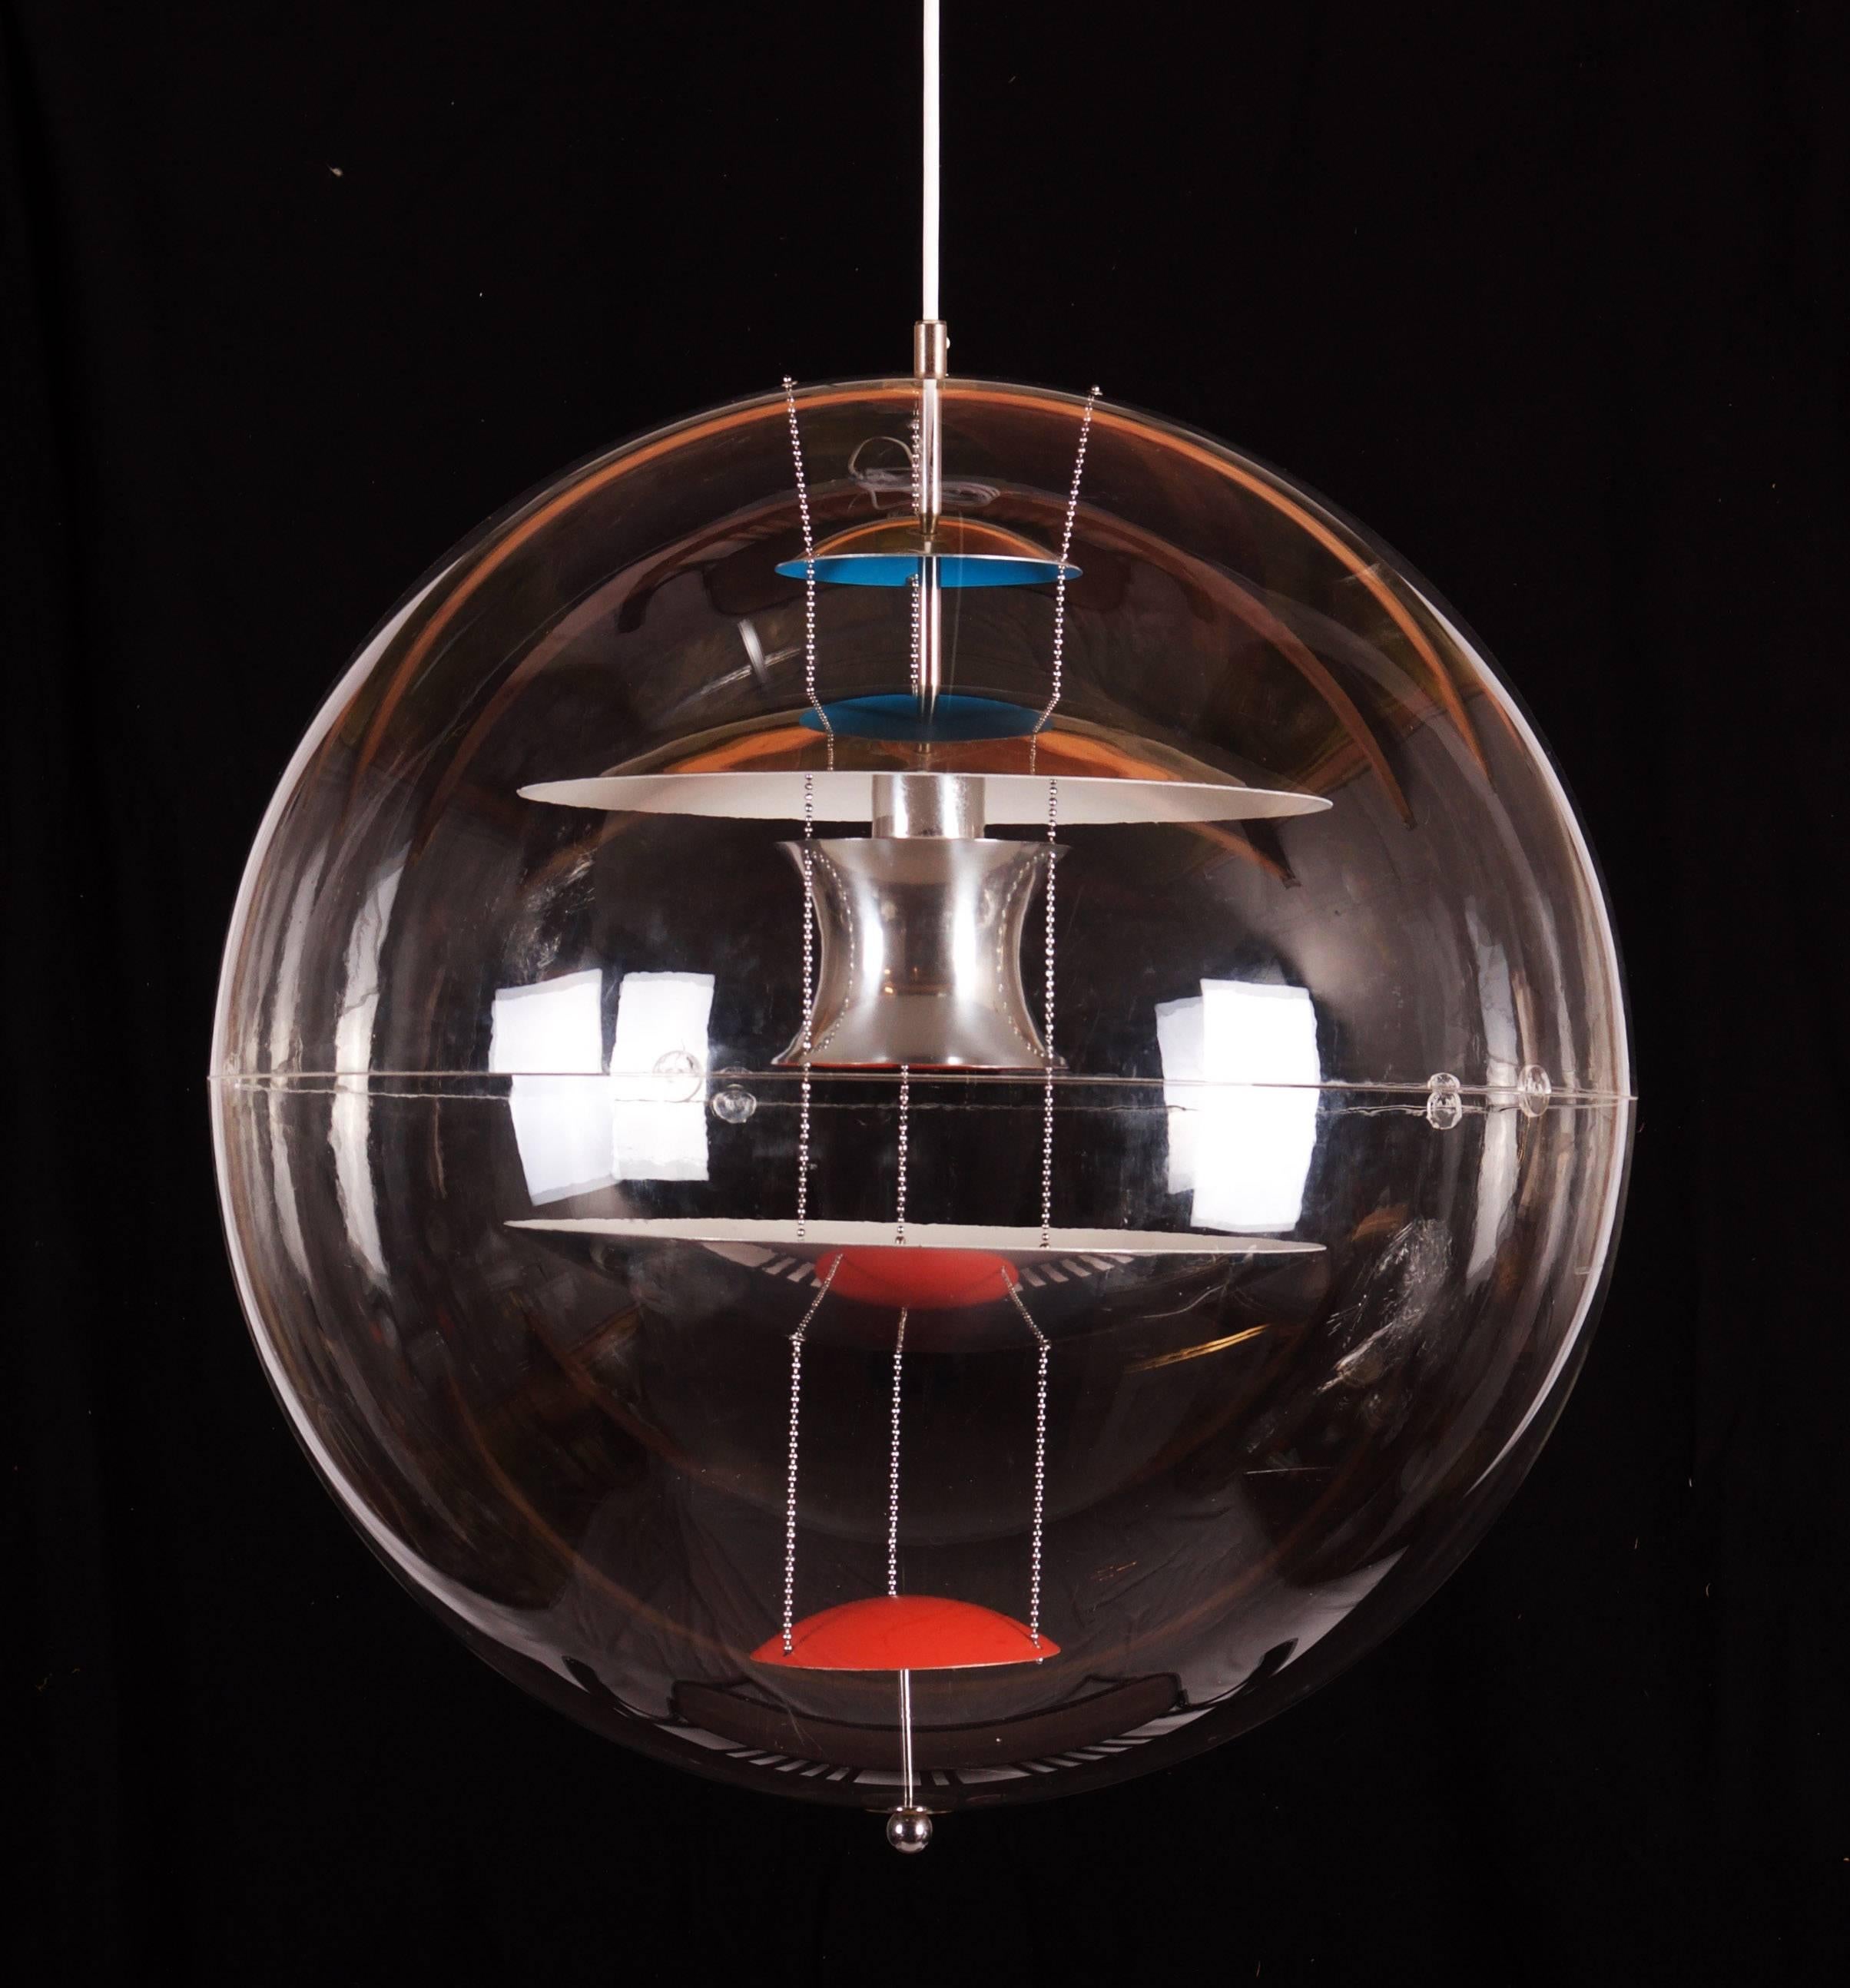 The biggest one ever produced, the iconic design by Verner Panton for Louis Poulsen in 1969. This acrylic globe encompasses five curved reflectors suspended through the center - three chrome, one red, the other blue. 
In perfect original vintage